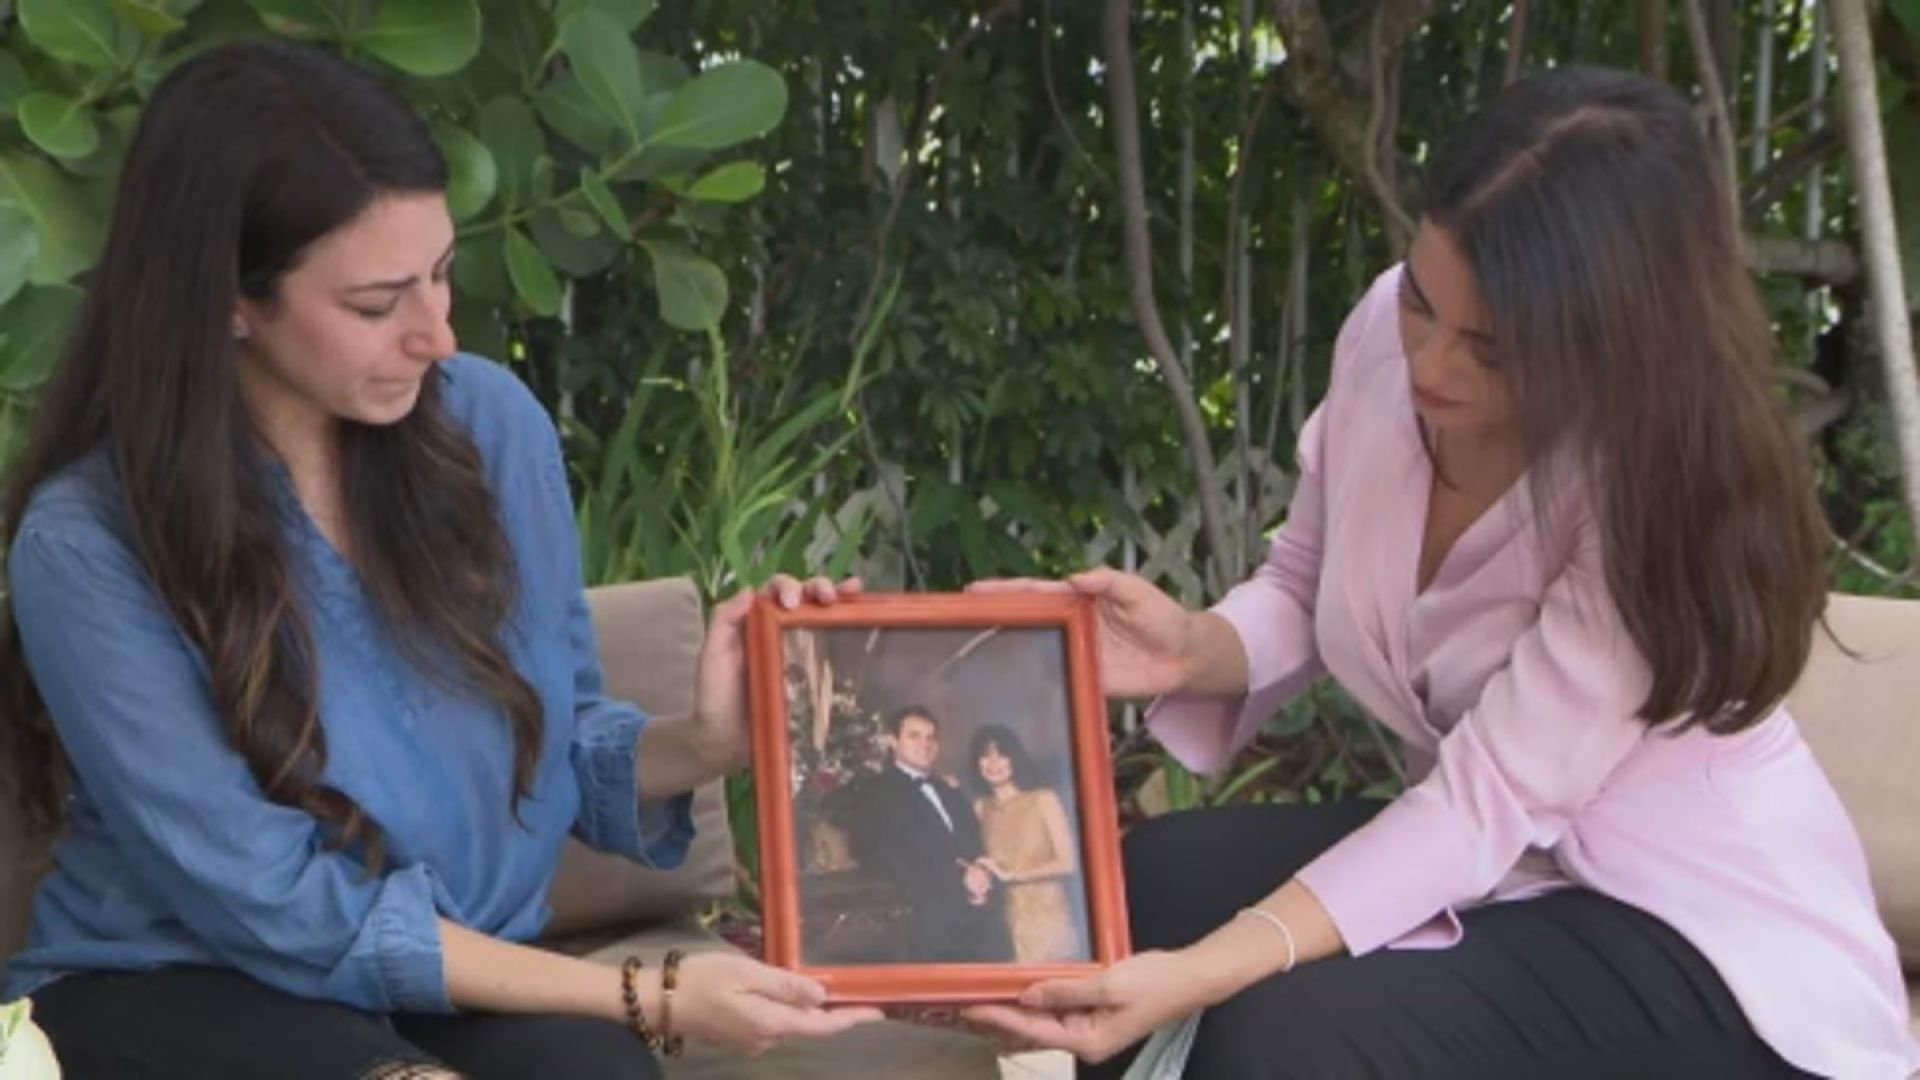 CBS4 reporrter Jessica Vallejo and another family member hold a photo featuring her uncle Charlie and his wife.